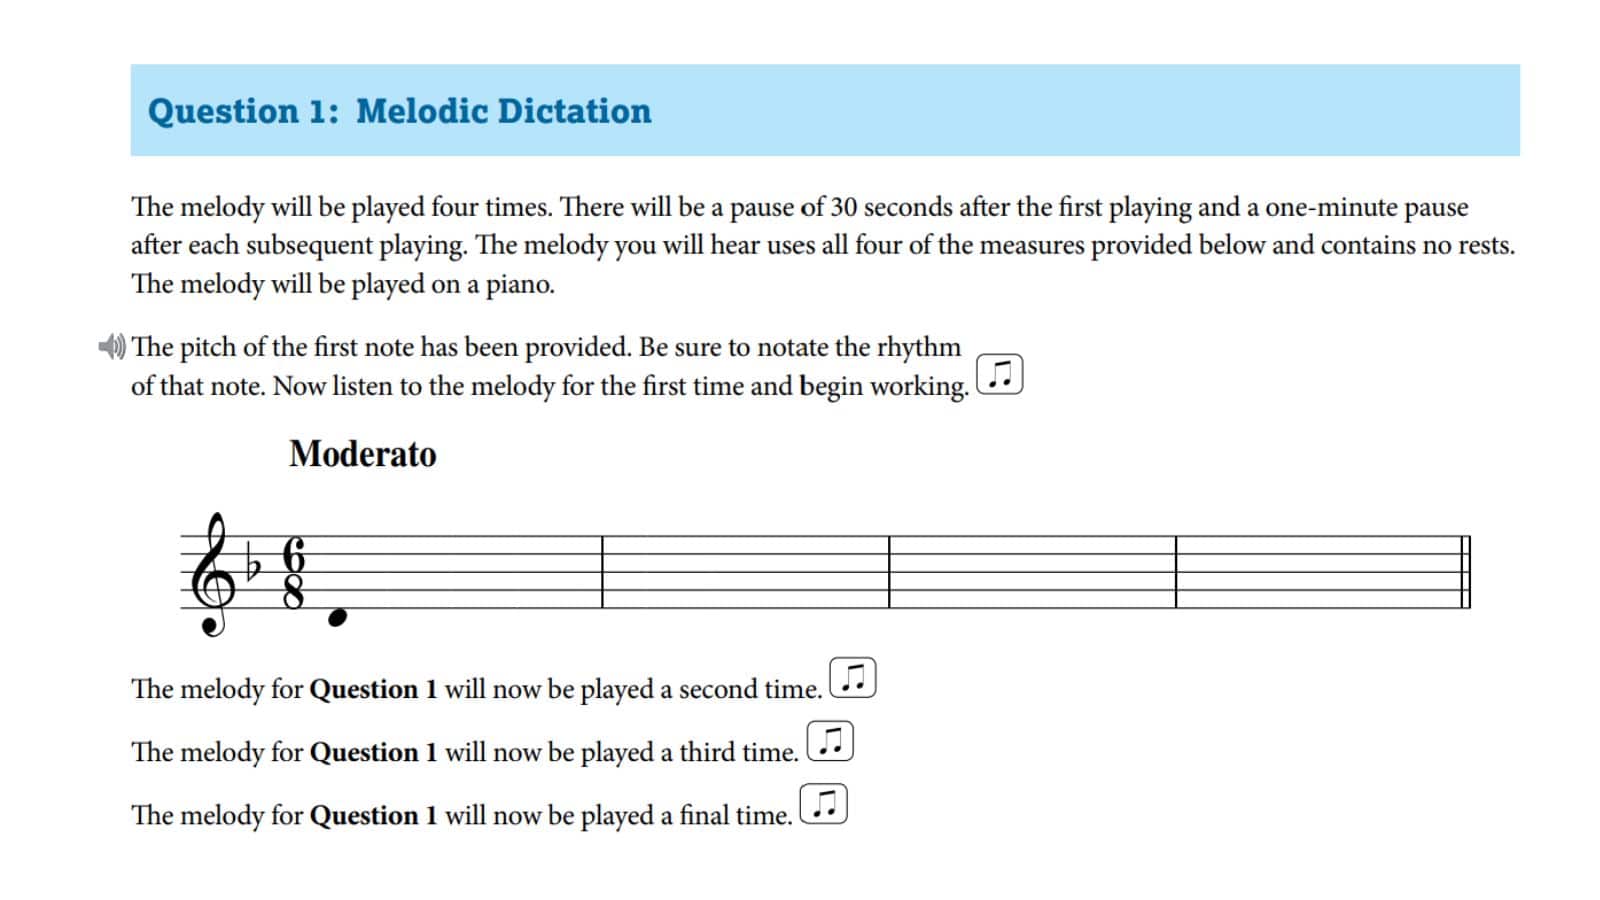 Sample question: Melodic Diction